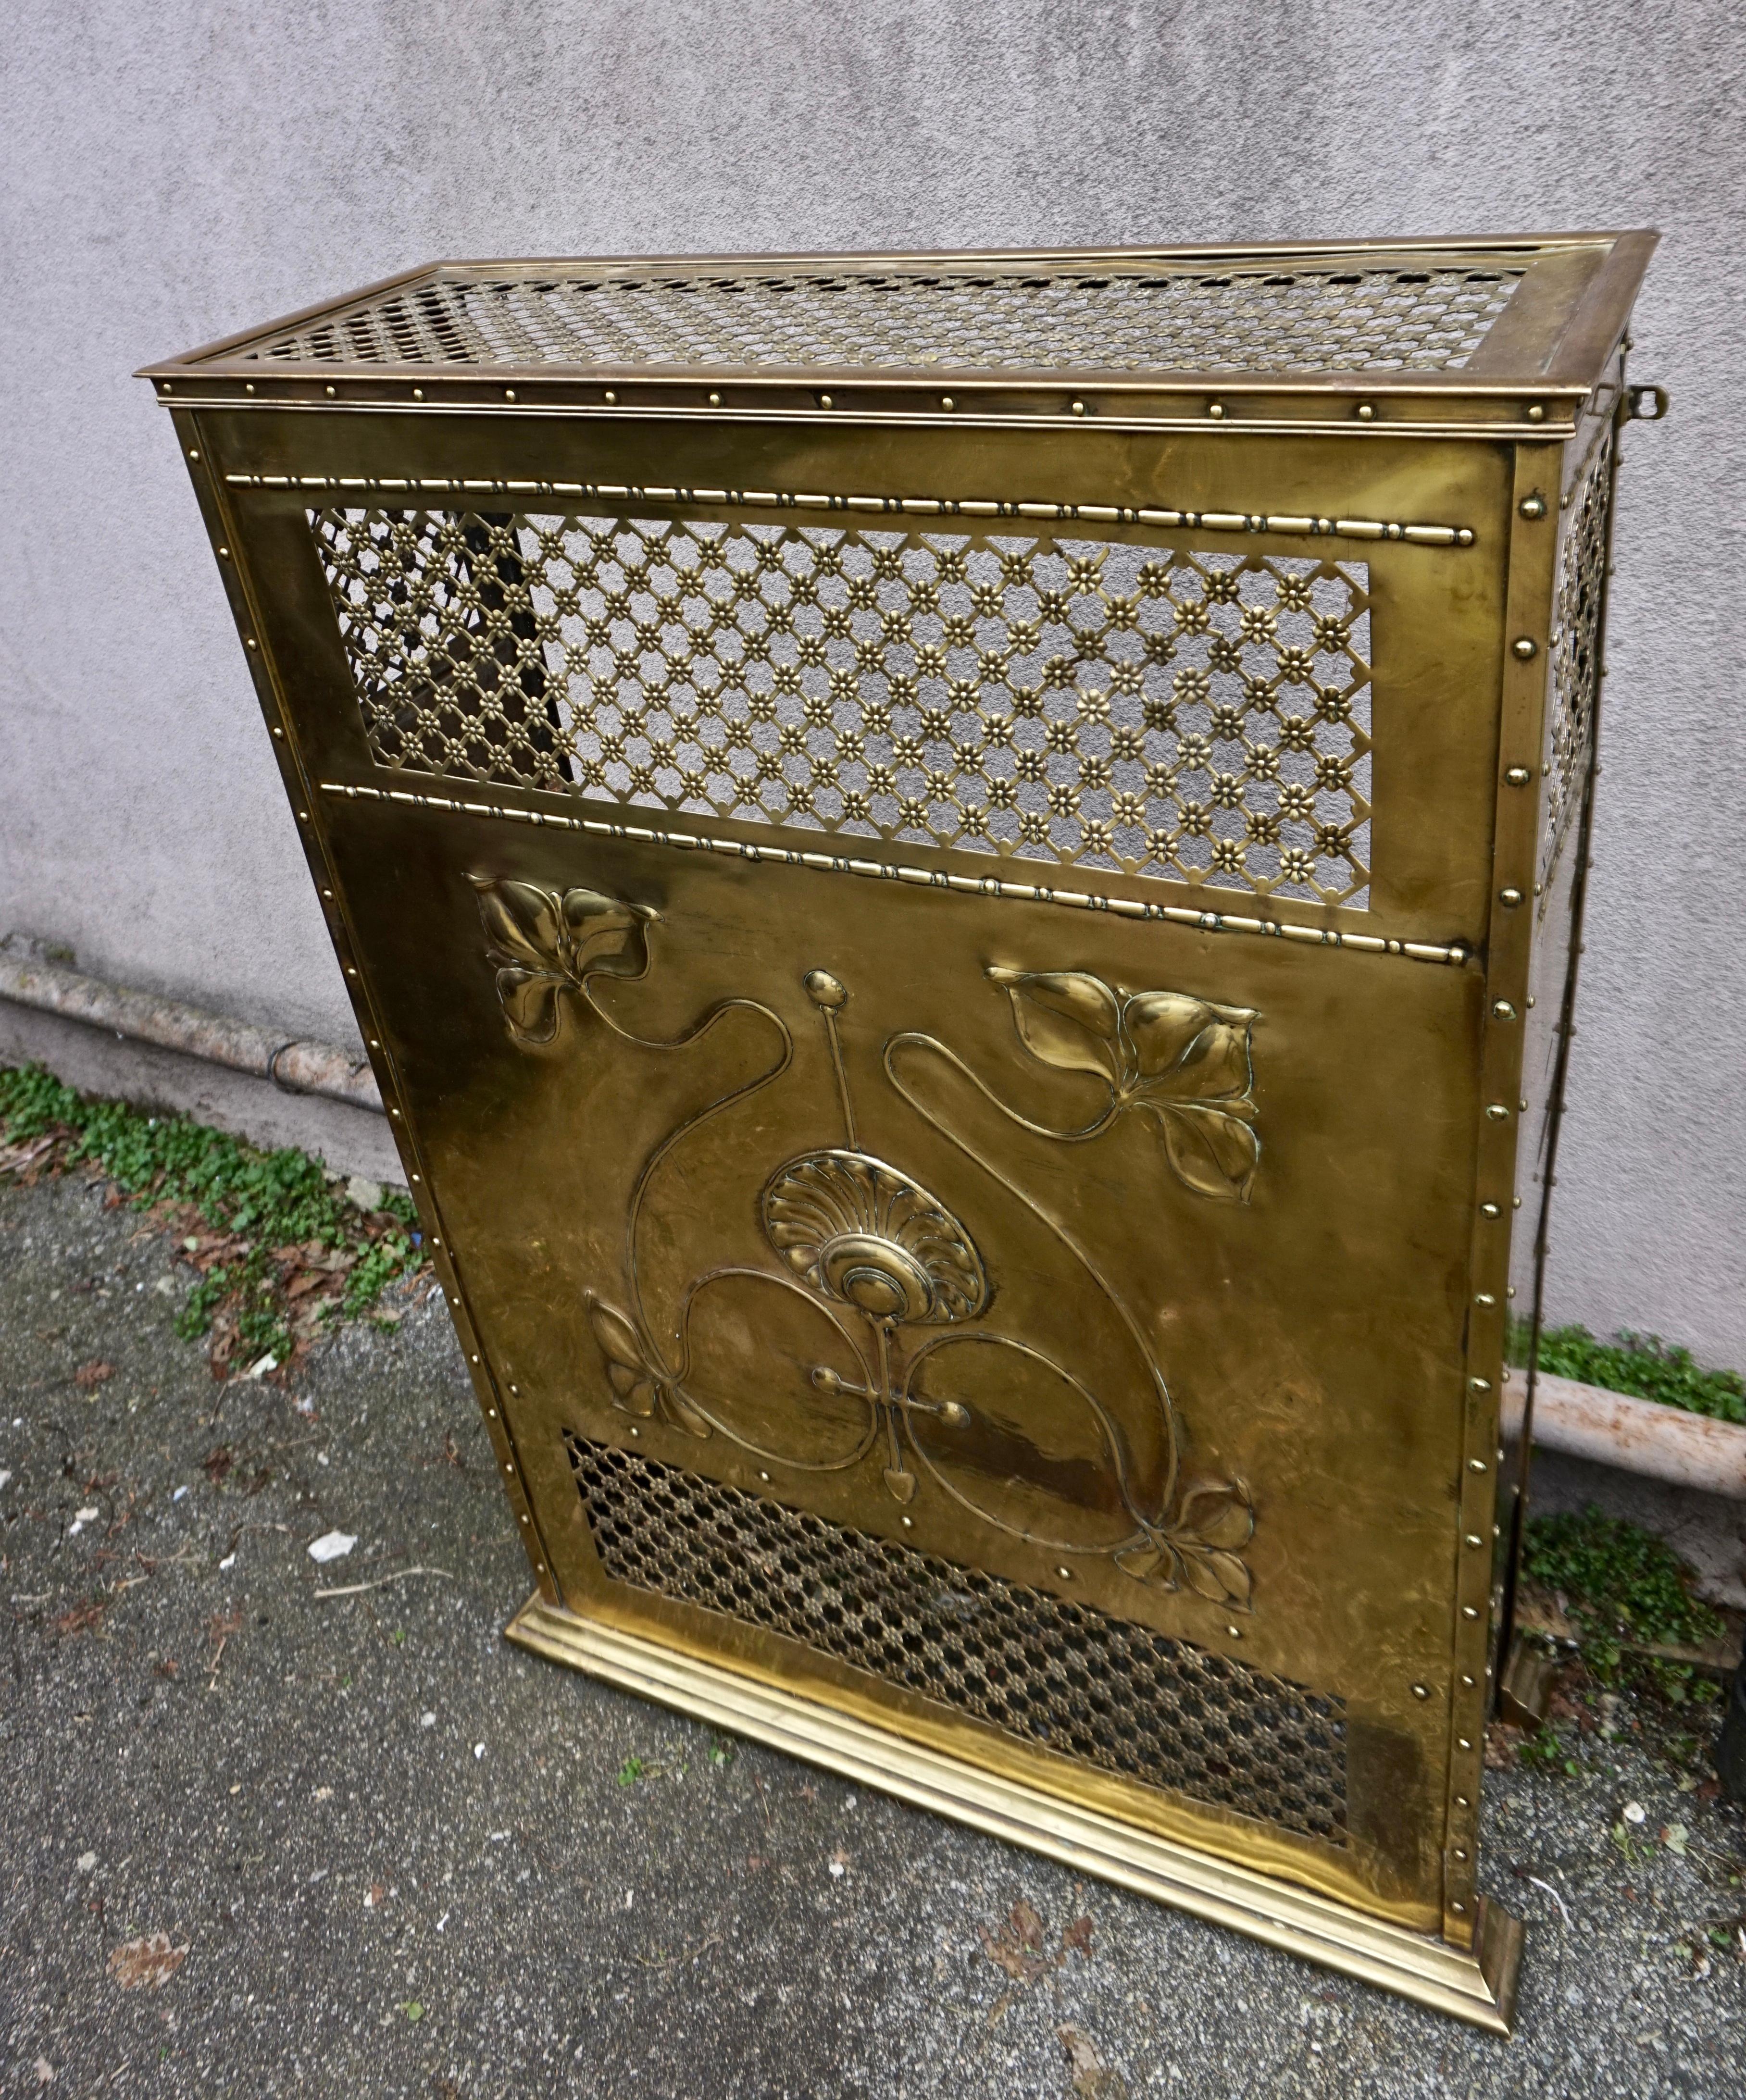 Rare all brass Arts & Crafts fireplace mantel screen from England with scrolling leaves and shell medallion motif. Highly creative statement mantel that can be used as intended or as a fireplace screen or objet d'art. Truly novel and exuding warmth.